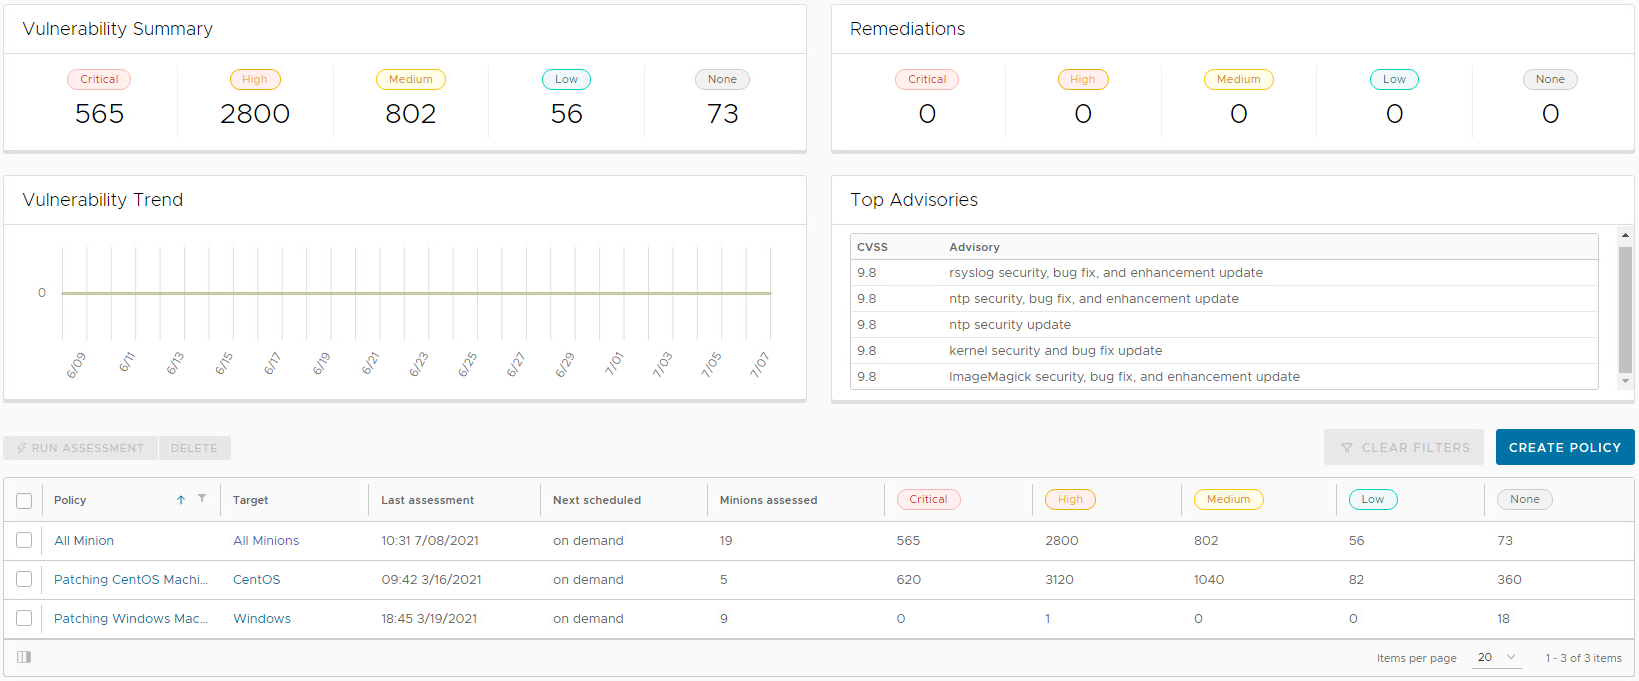 This is a screenshot of the SaltStack SecOps Vulnerability Summary and Top Advisories Dashboard.